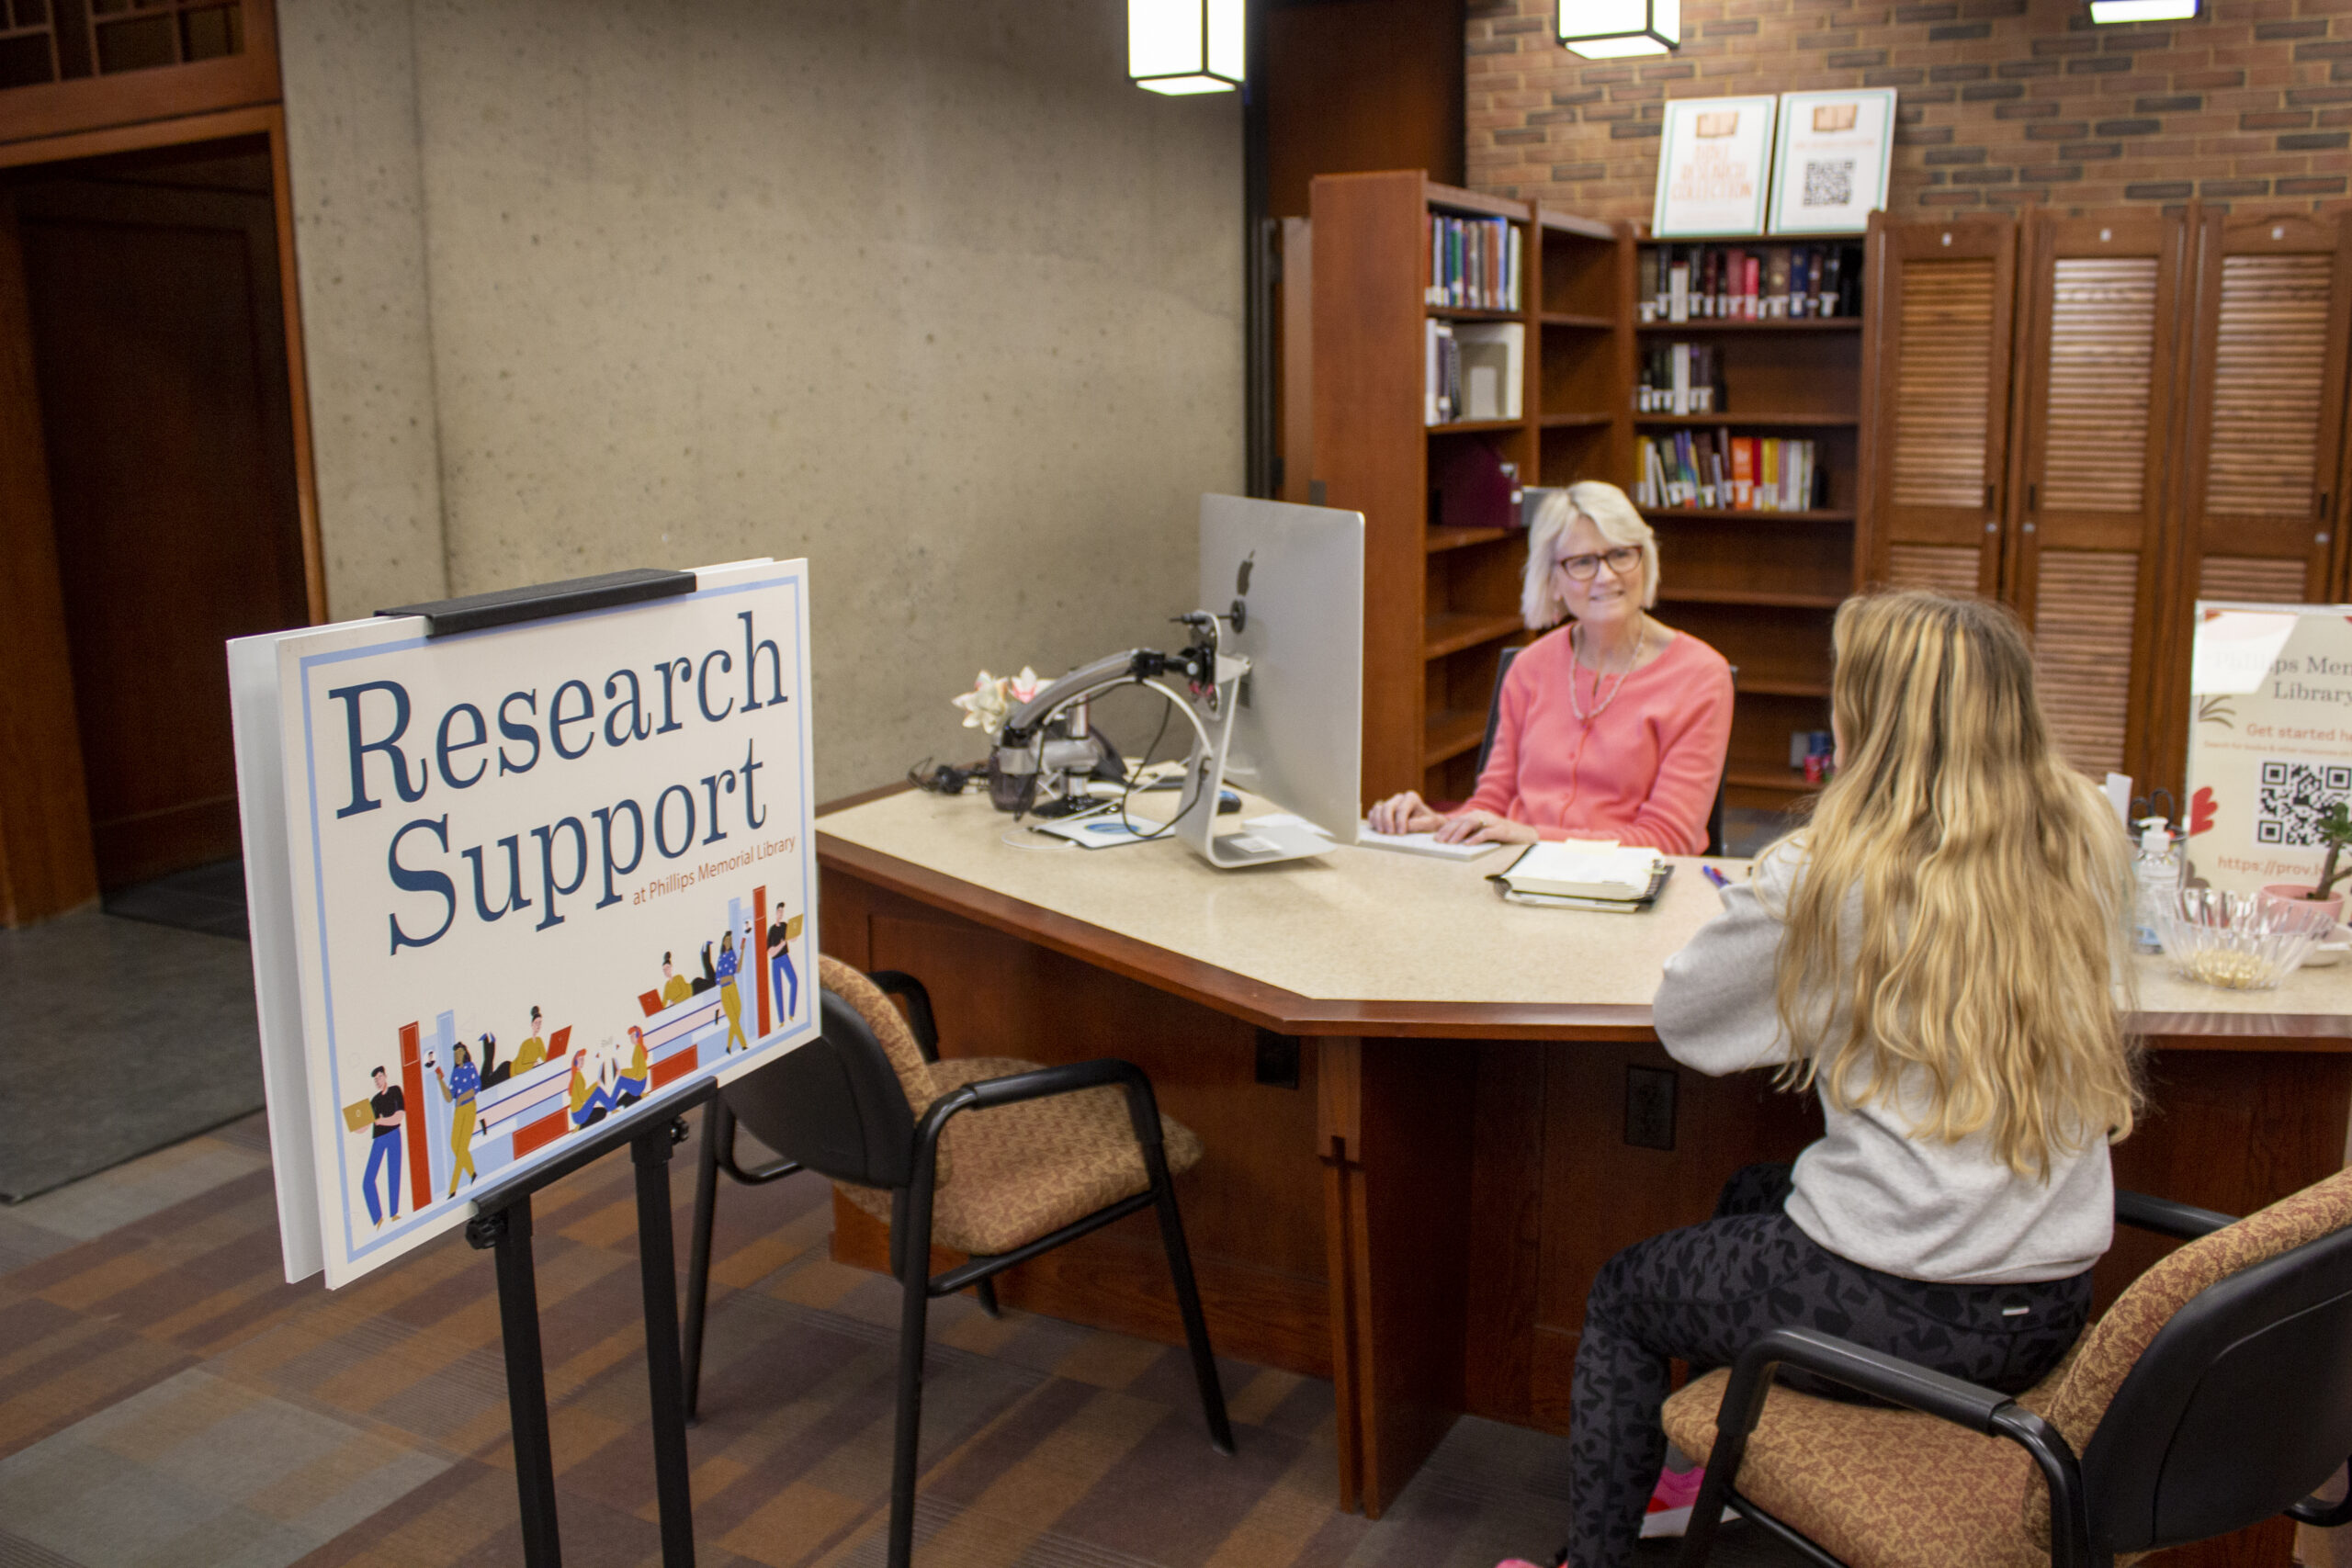 A librarian assisting a student a the Research Support desk.